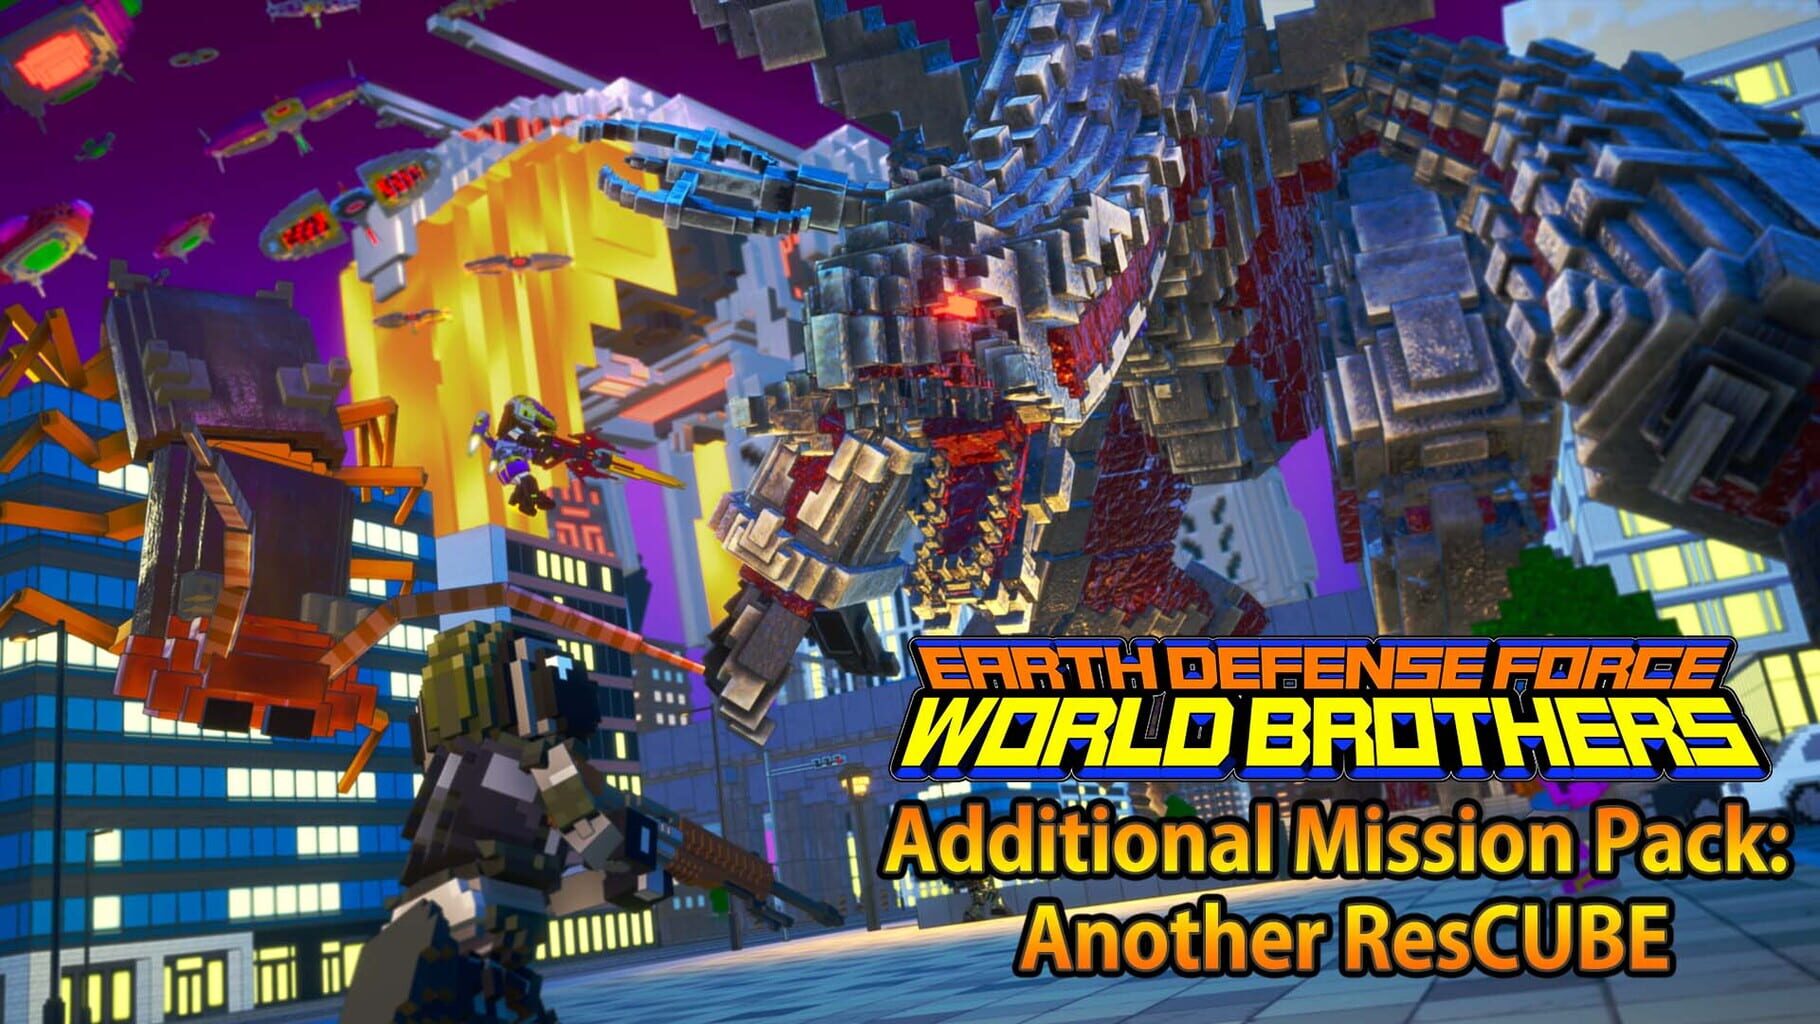 Earth Defense Force: World Brothers - Additional Mission Pack: Another Rescube artwork